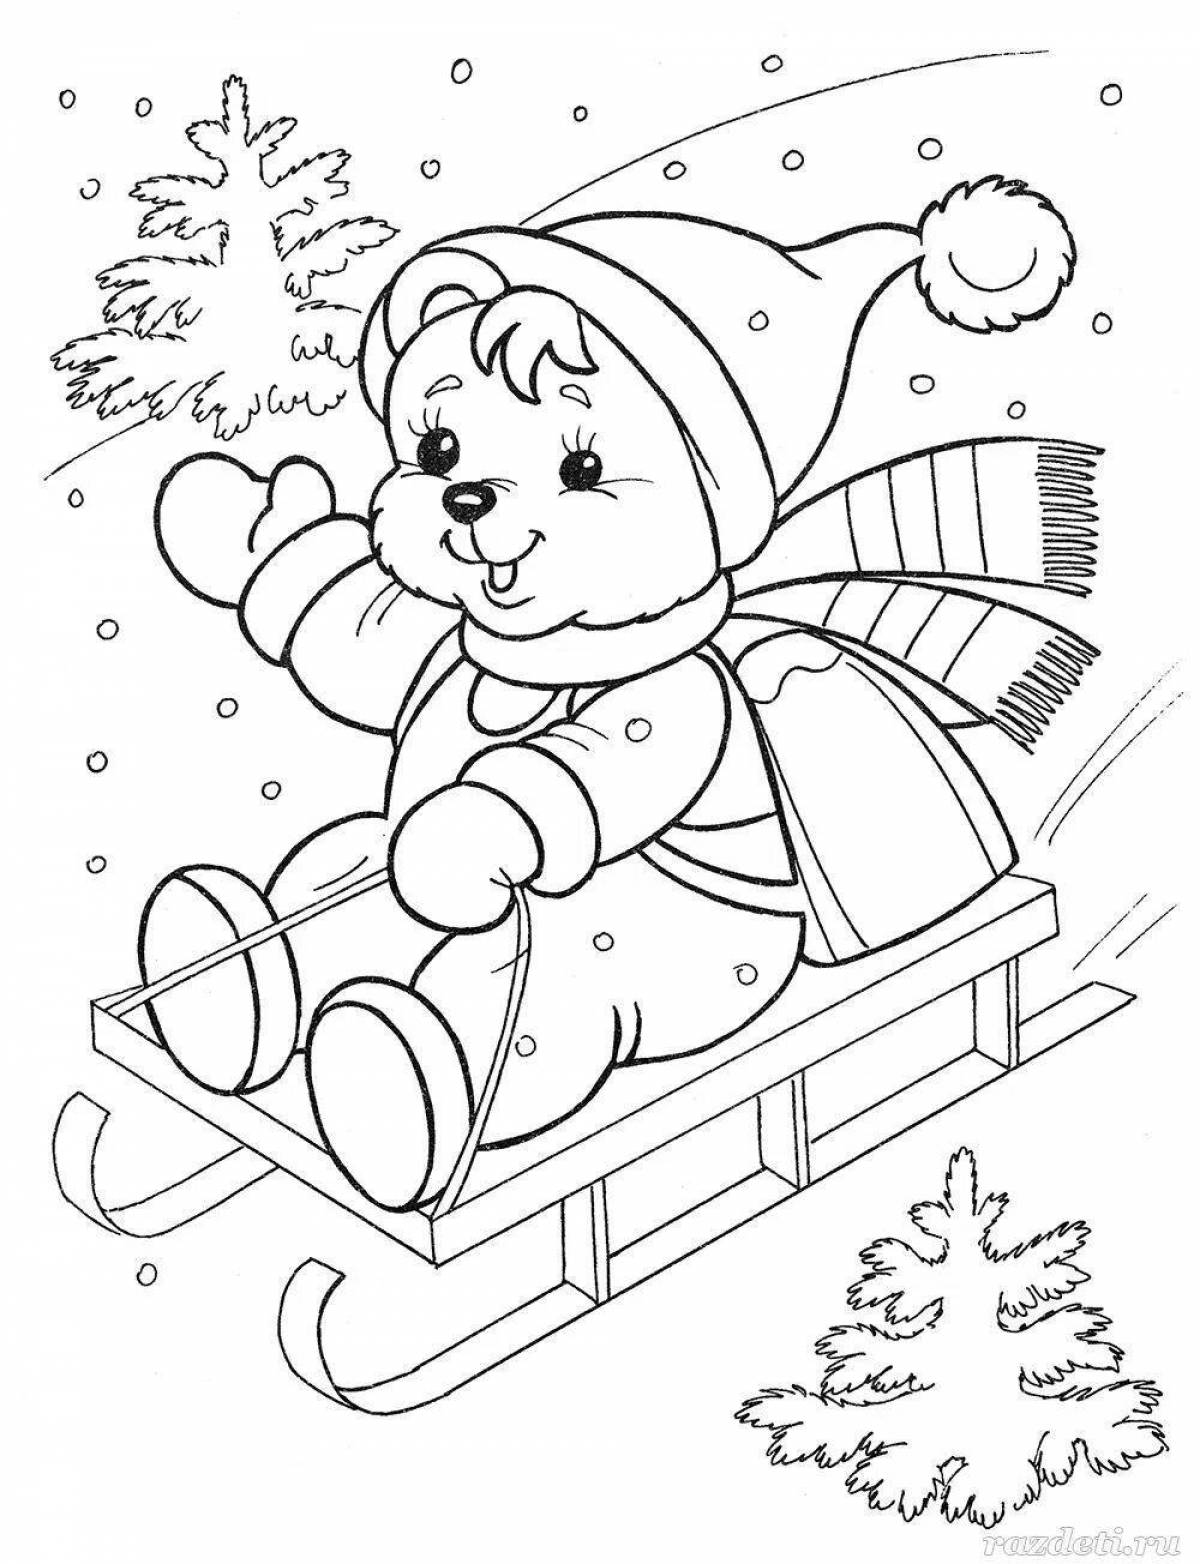 Impressive winter coloring book for 3-4 year olds